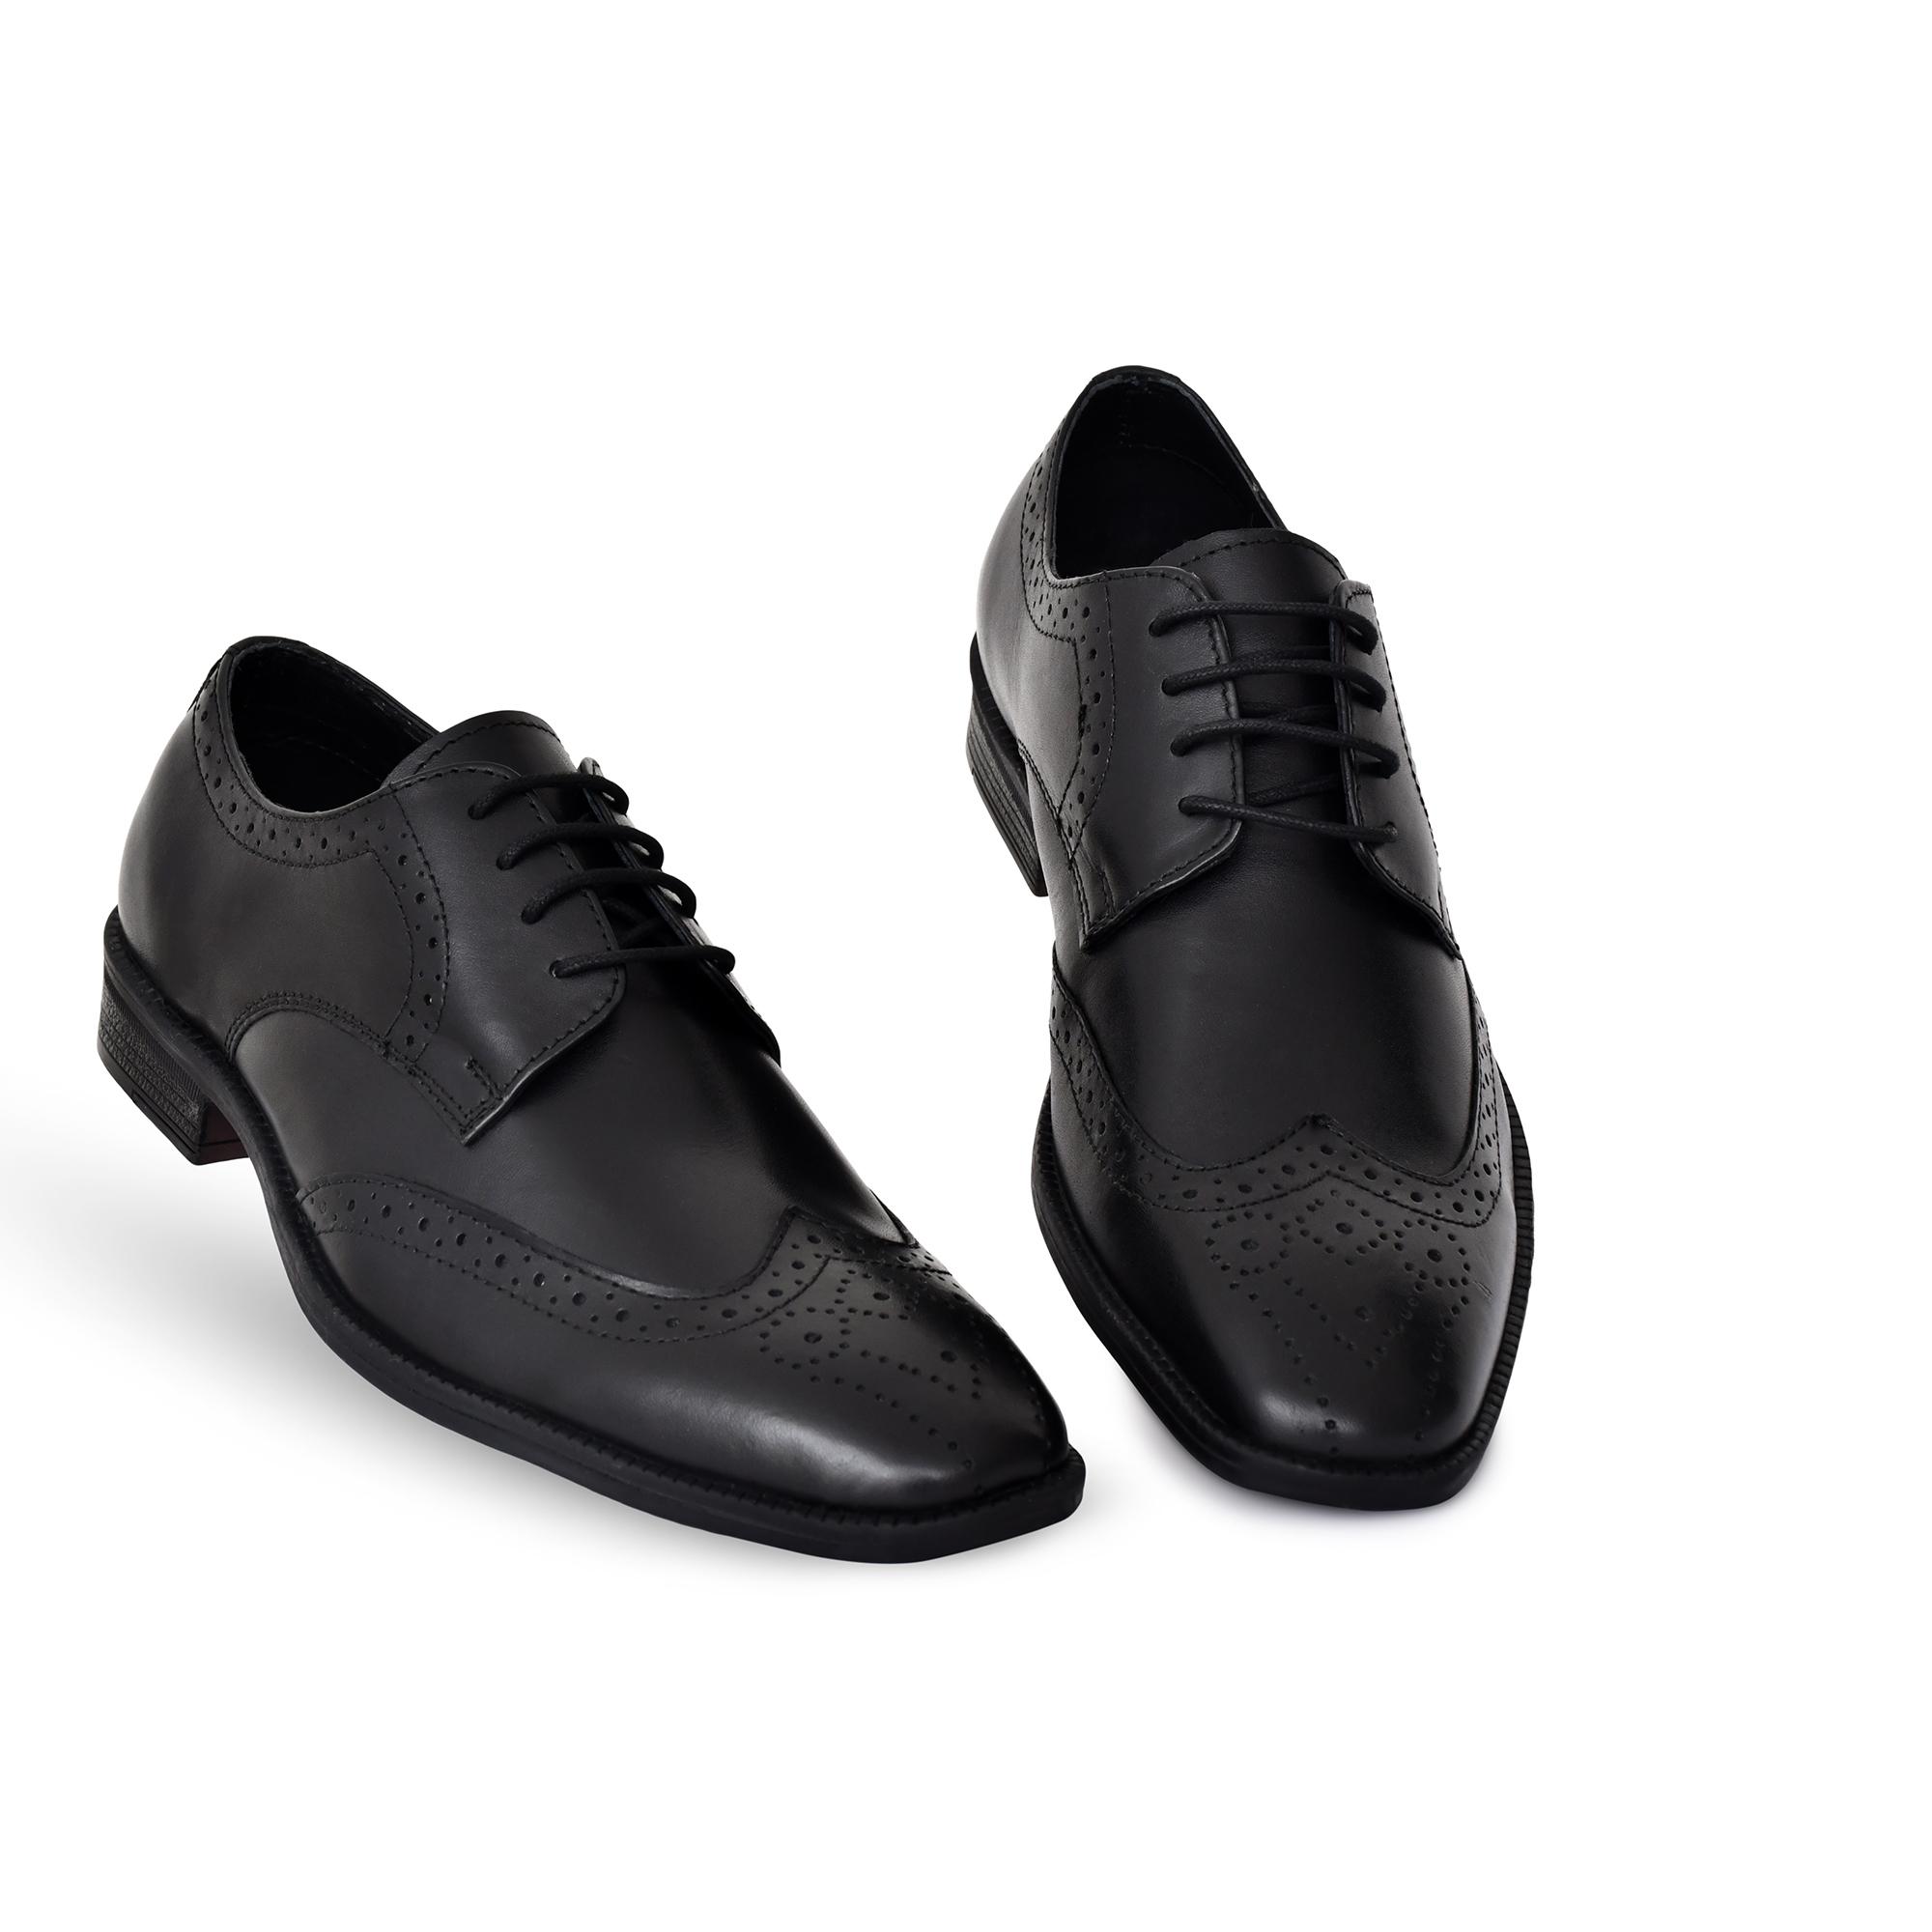 MAEVE & SHELBY Mens Geniune Stylish Leather Formal Black Brogue Classy Shoes 